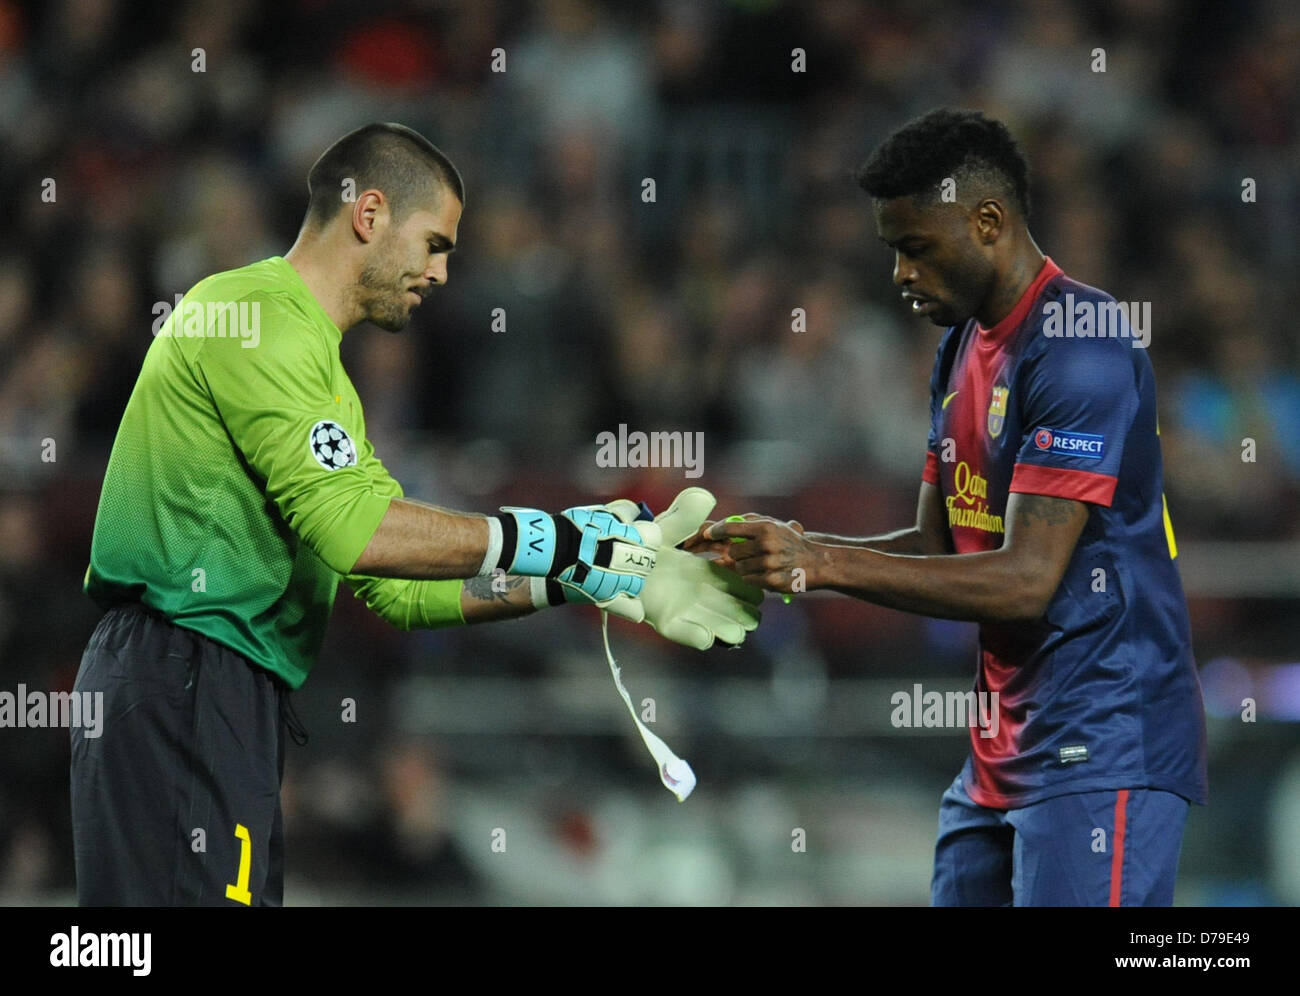 Barcelona's goalkeeper Victor Valdes (L) and Alex Song during the UEFA Champions League semi final second leg soccer match between FC Barcelona and FC Bayern Munich at Camp Nou Stadium in Barcelona, Spain, 01 May 2013. Photo: Andreas Gebert/dpa +++(c) dpa - Bildfunk+++ Stock Photo